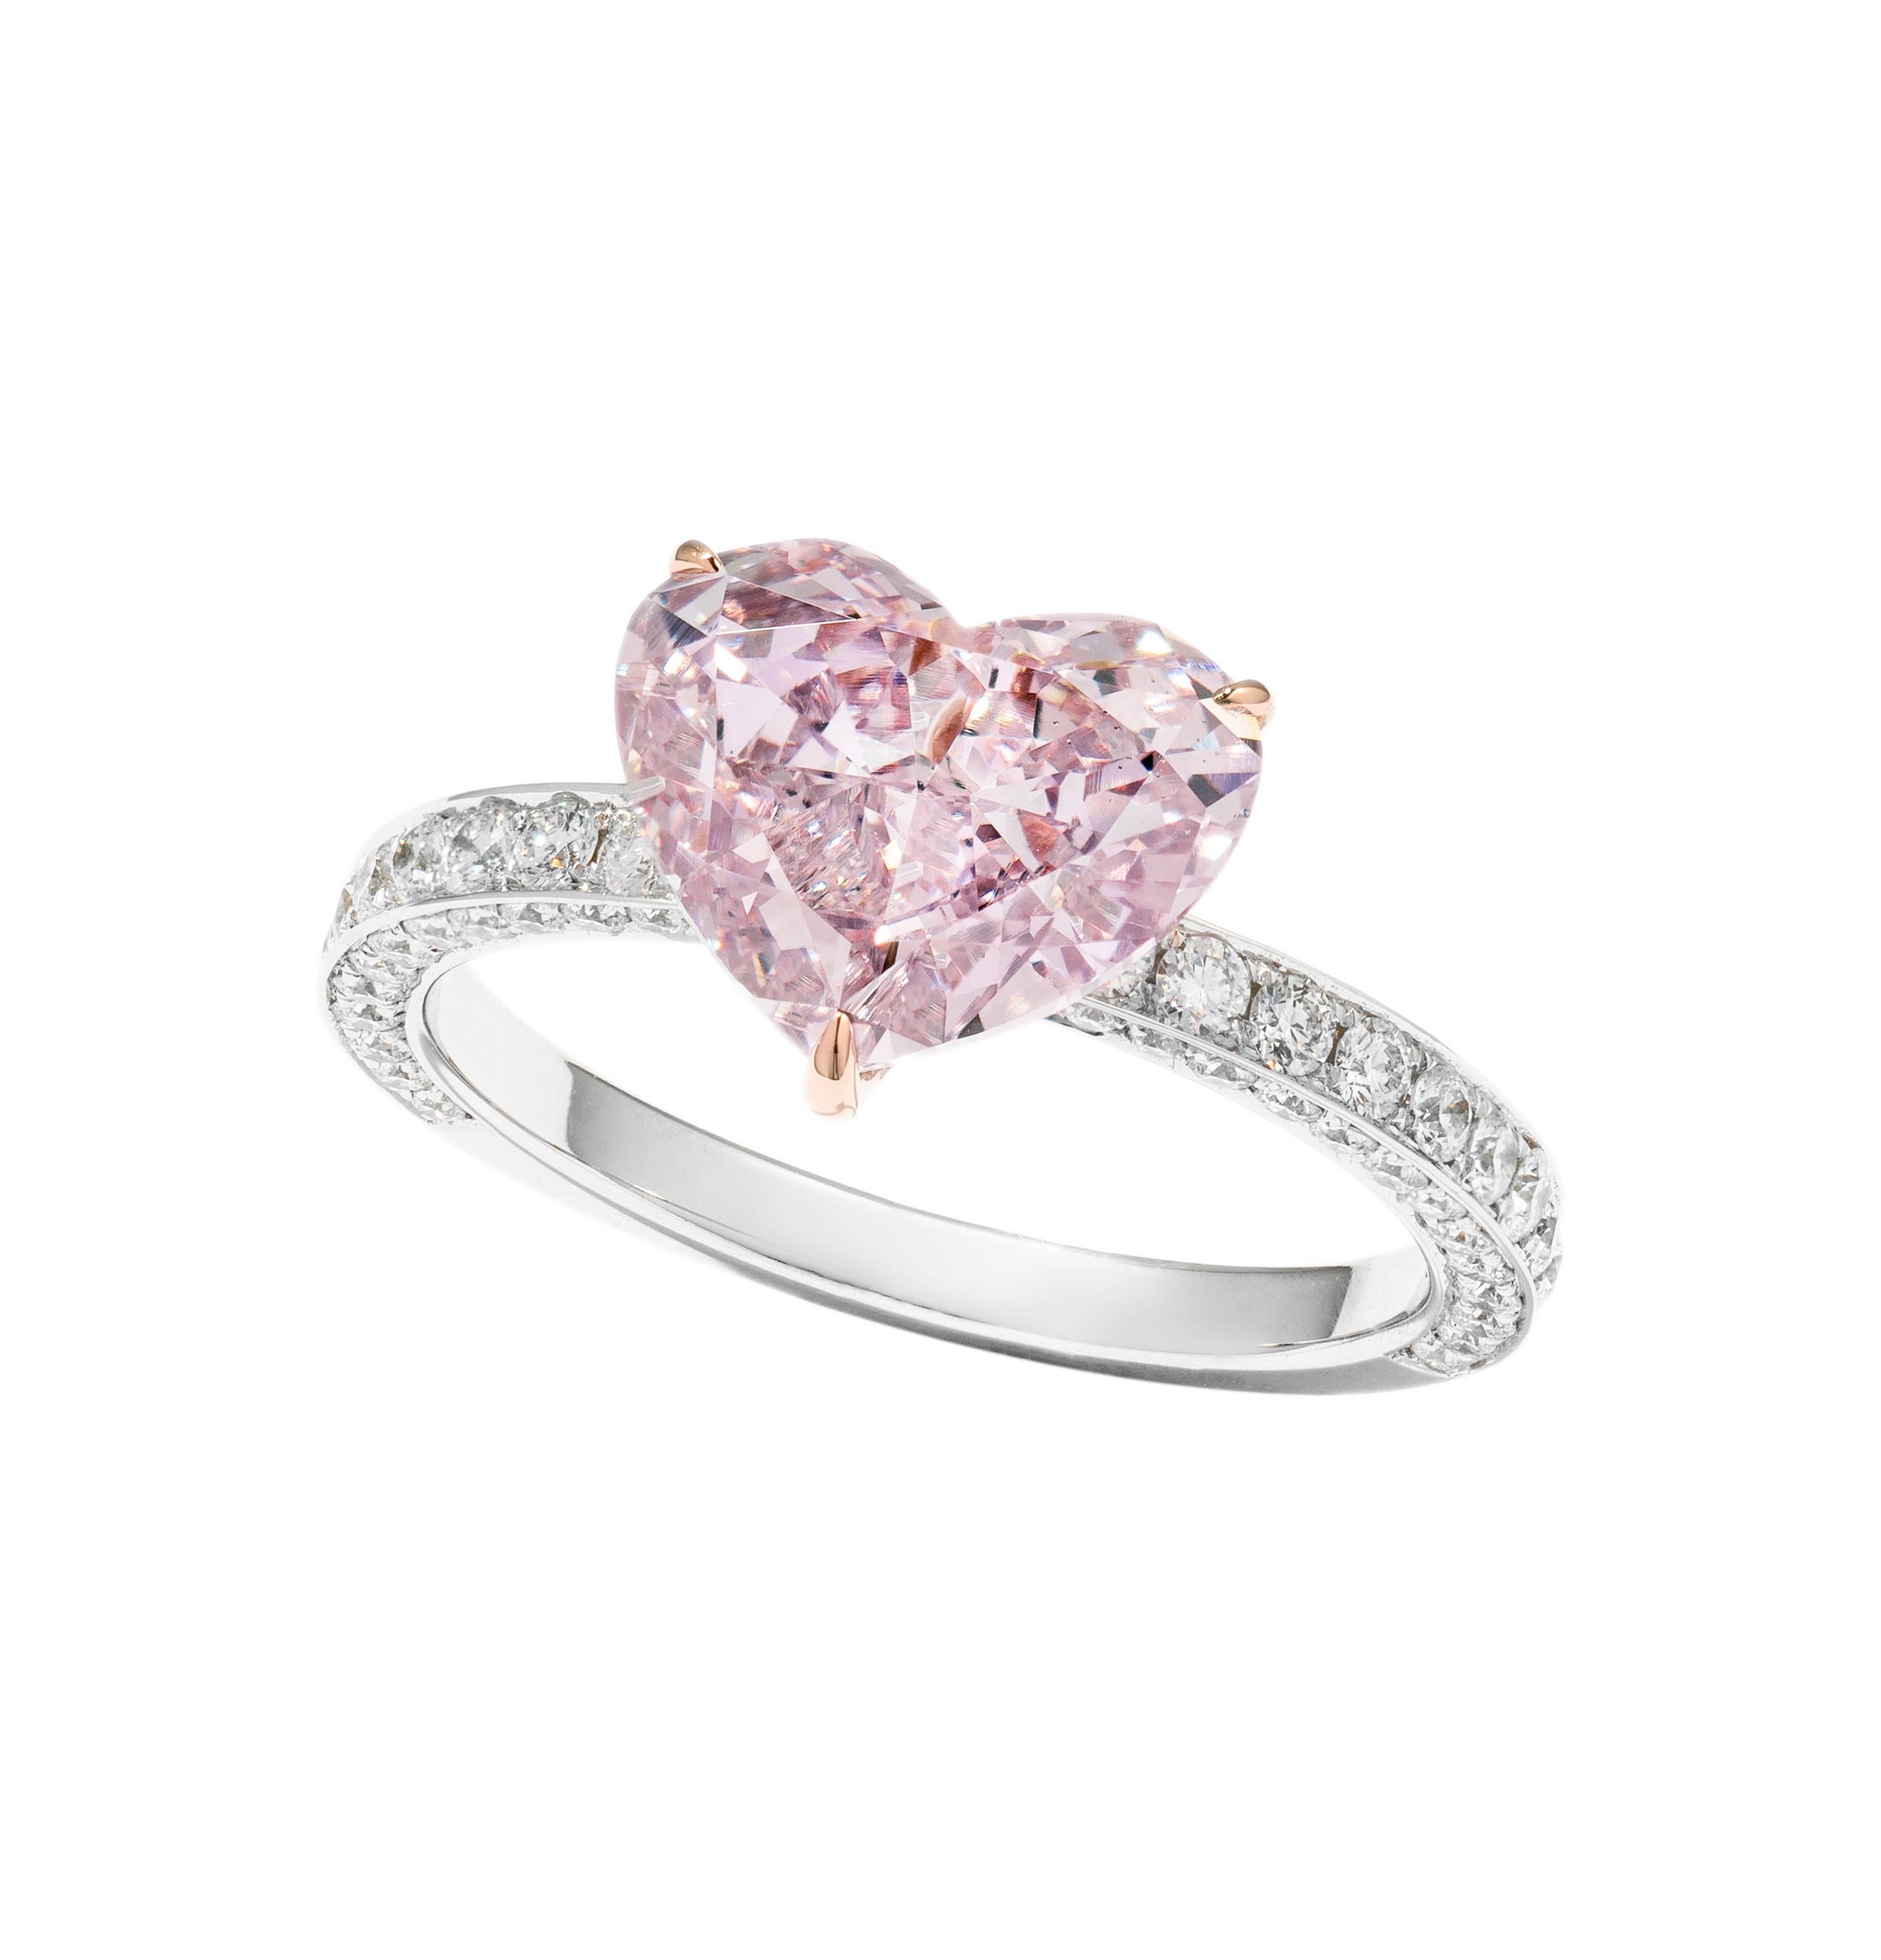 This piece is available for custom order only. 

Sweet, romance featuring a 2.53 carat Fancy Pink Purple Diamond (GIA Certificate #5141346599) heart shape ring. Vihari Jewels created this collector's item for the feminine women in mind. The ring is